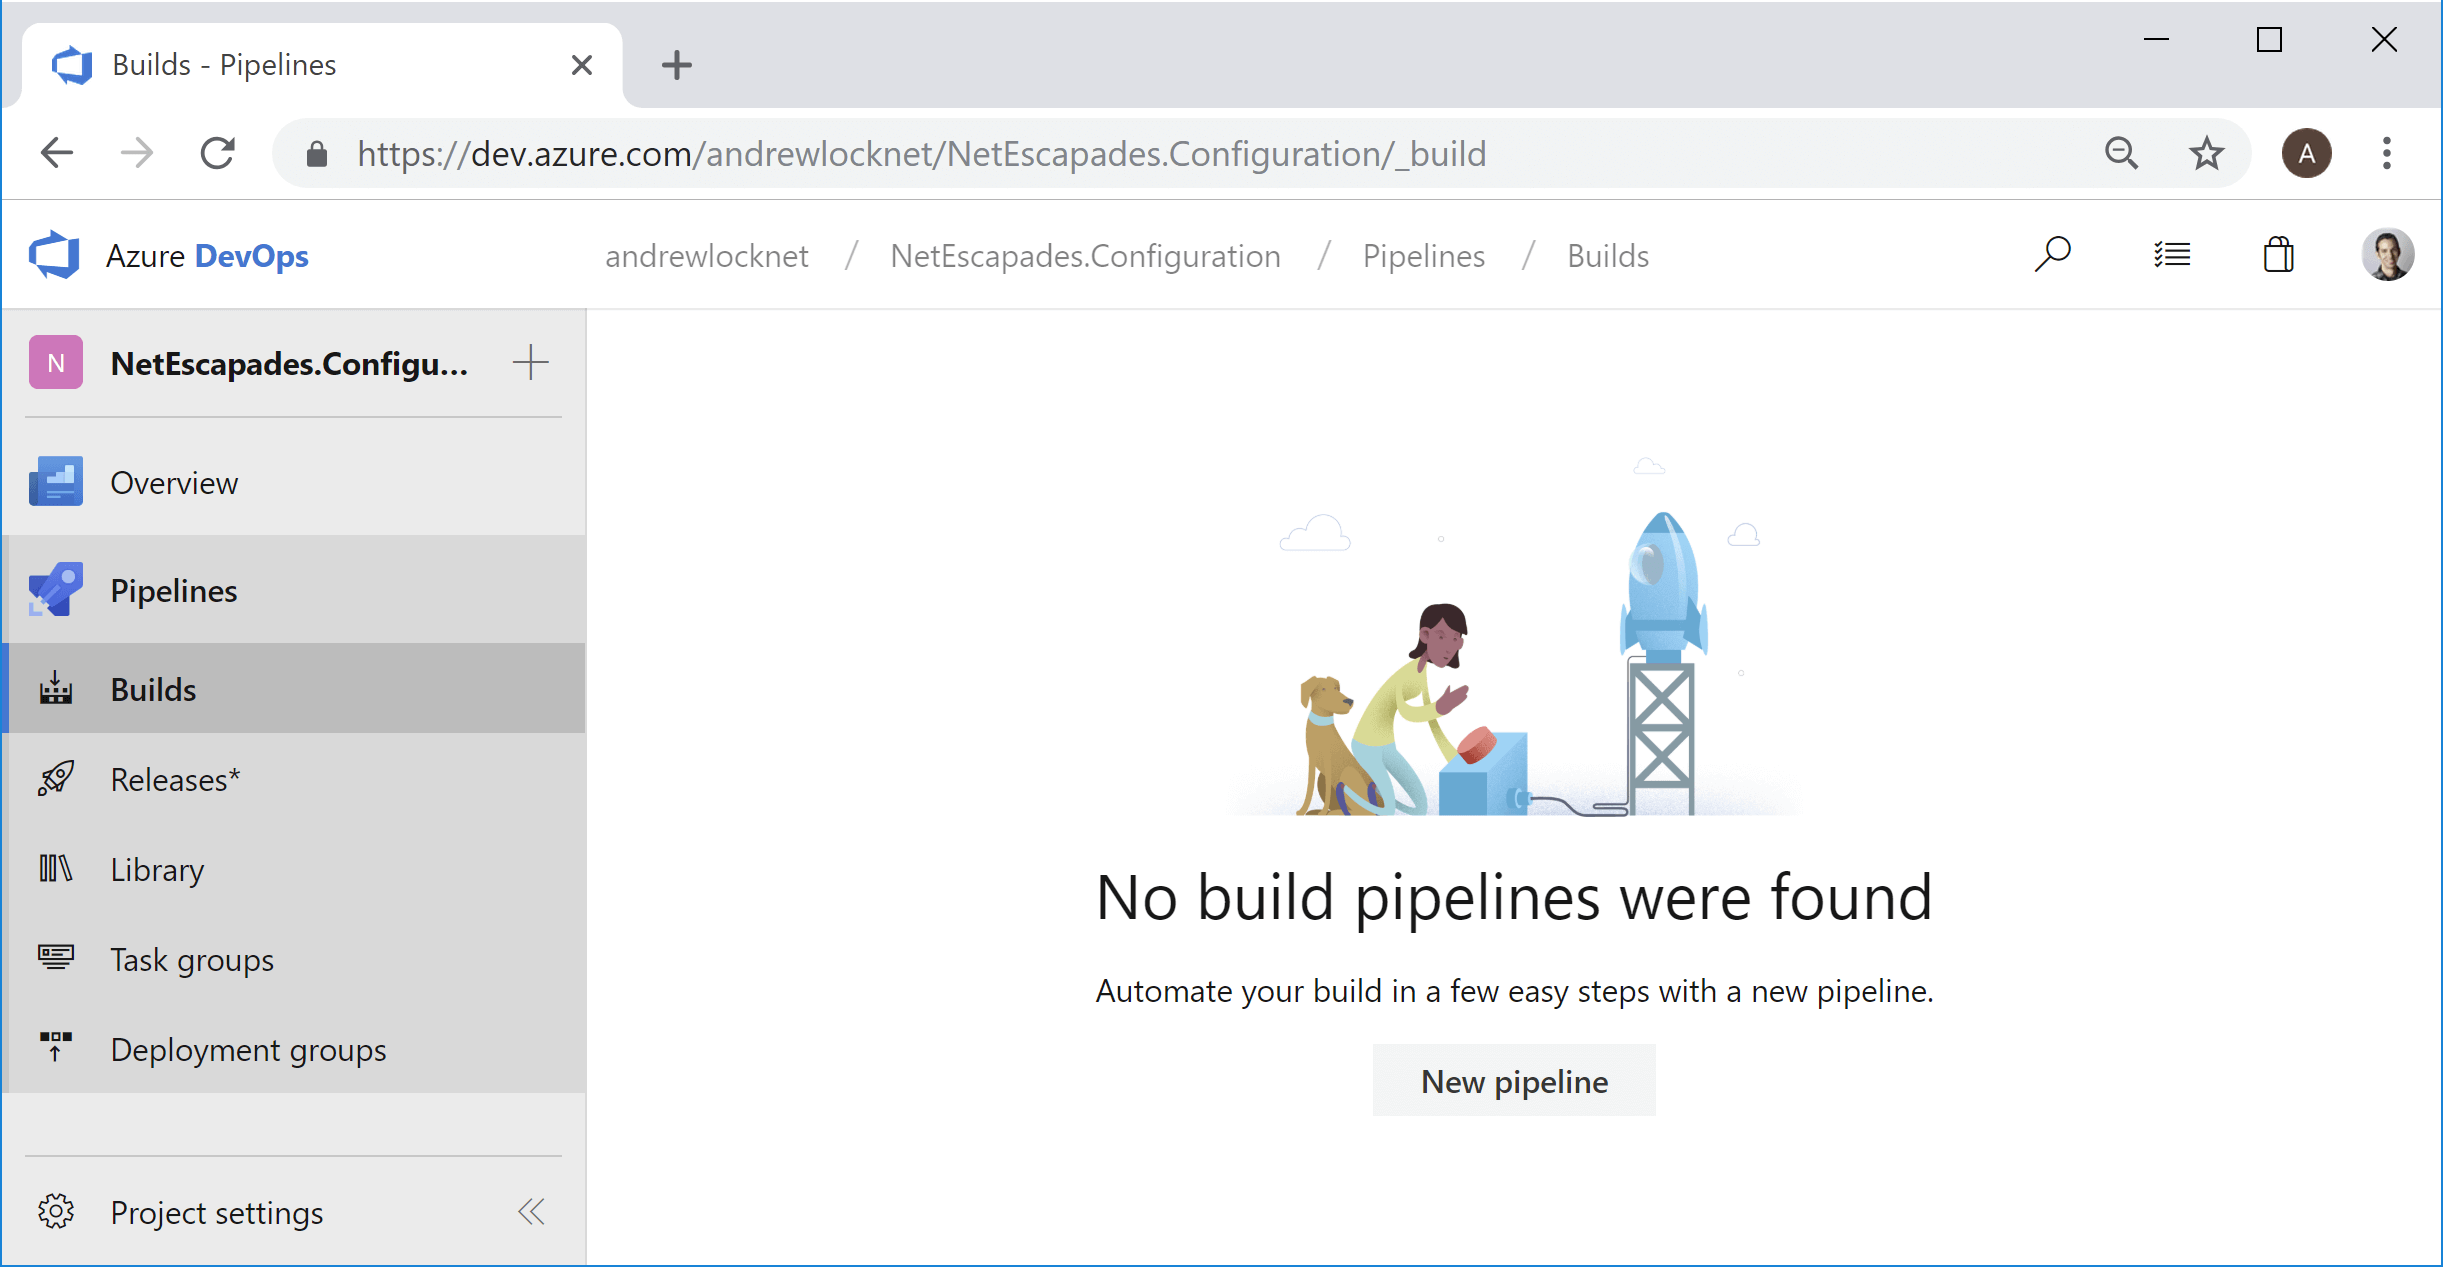 The build pipeline home page